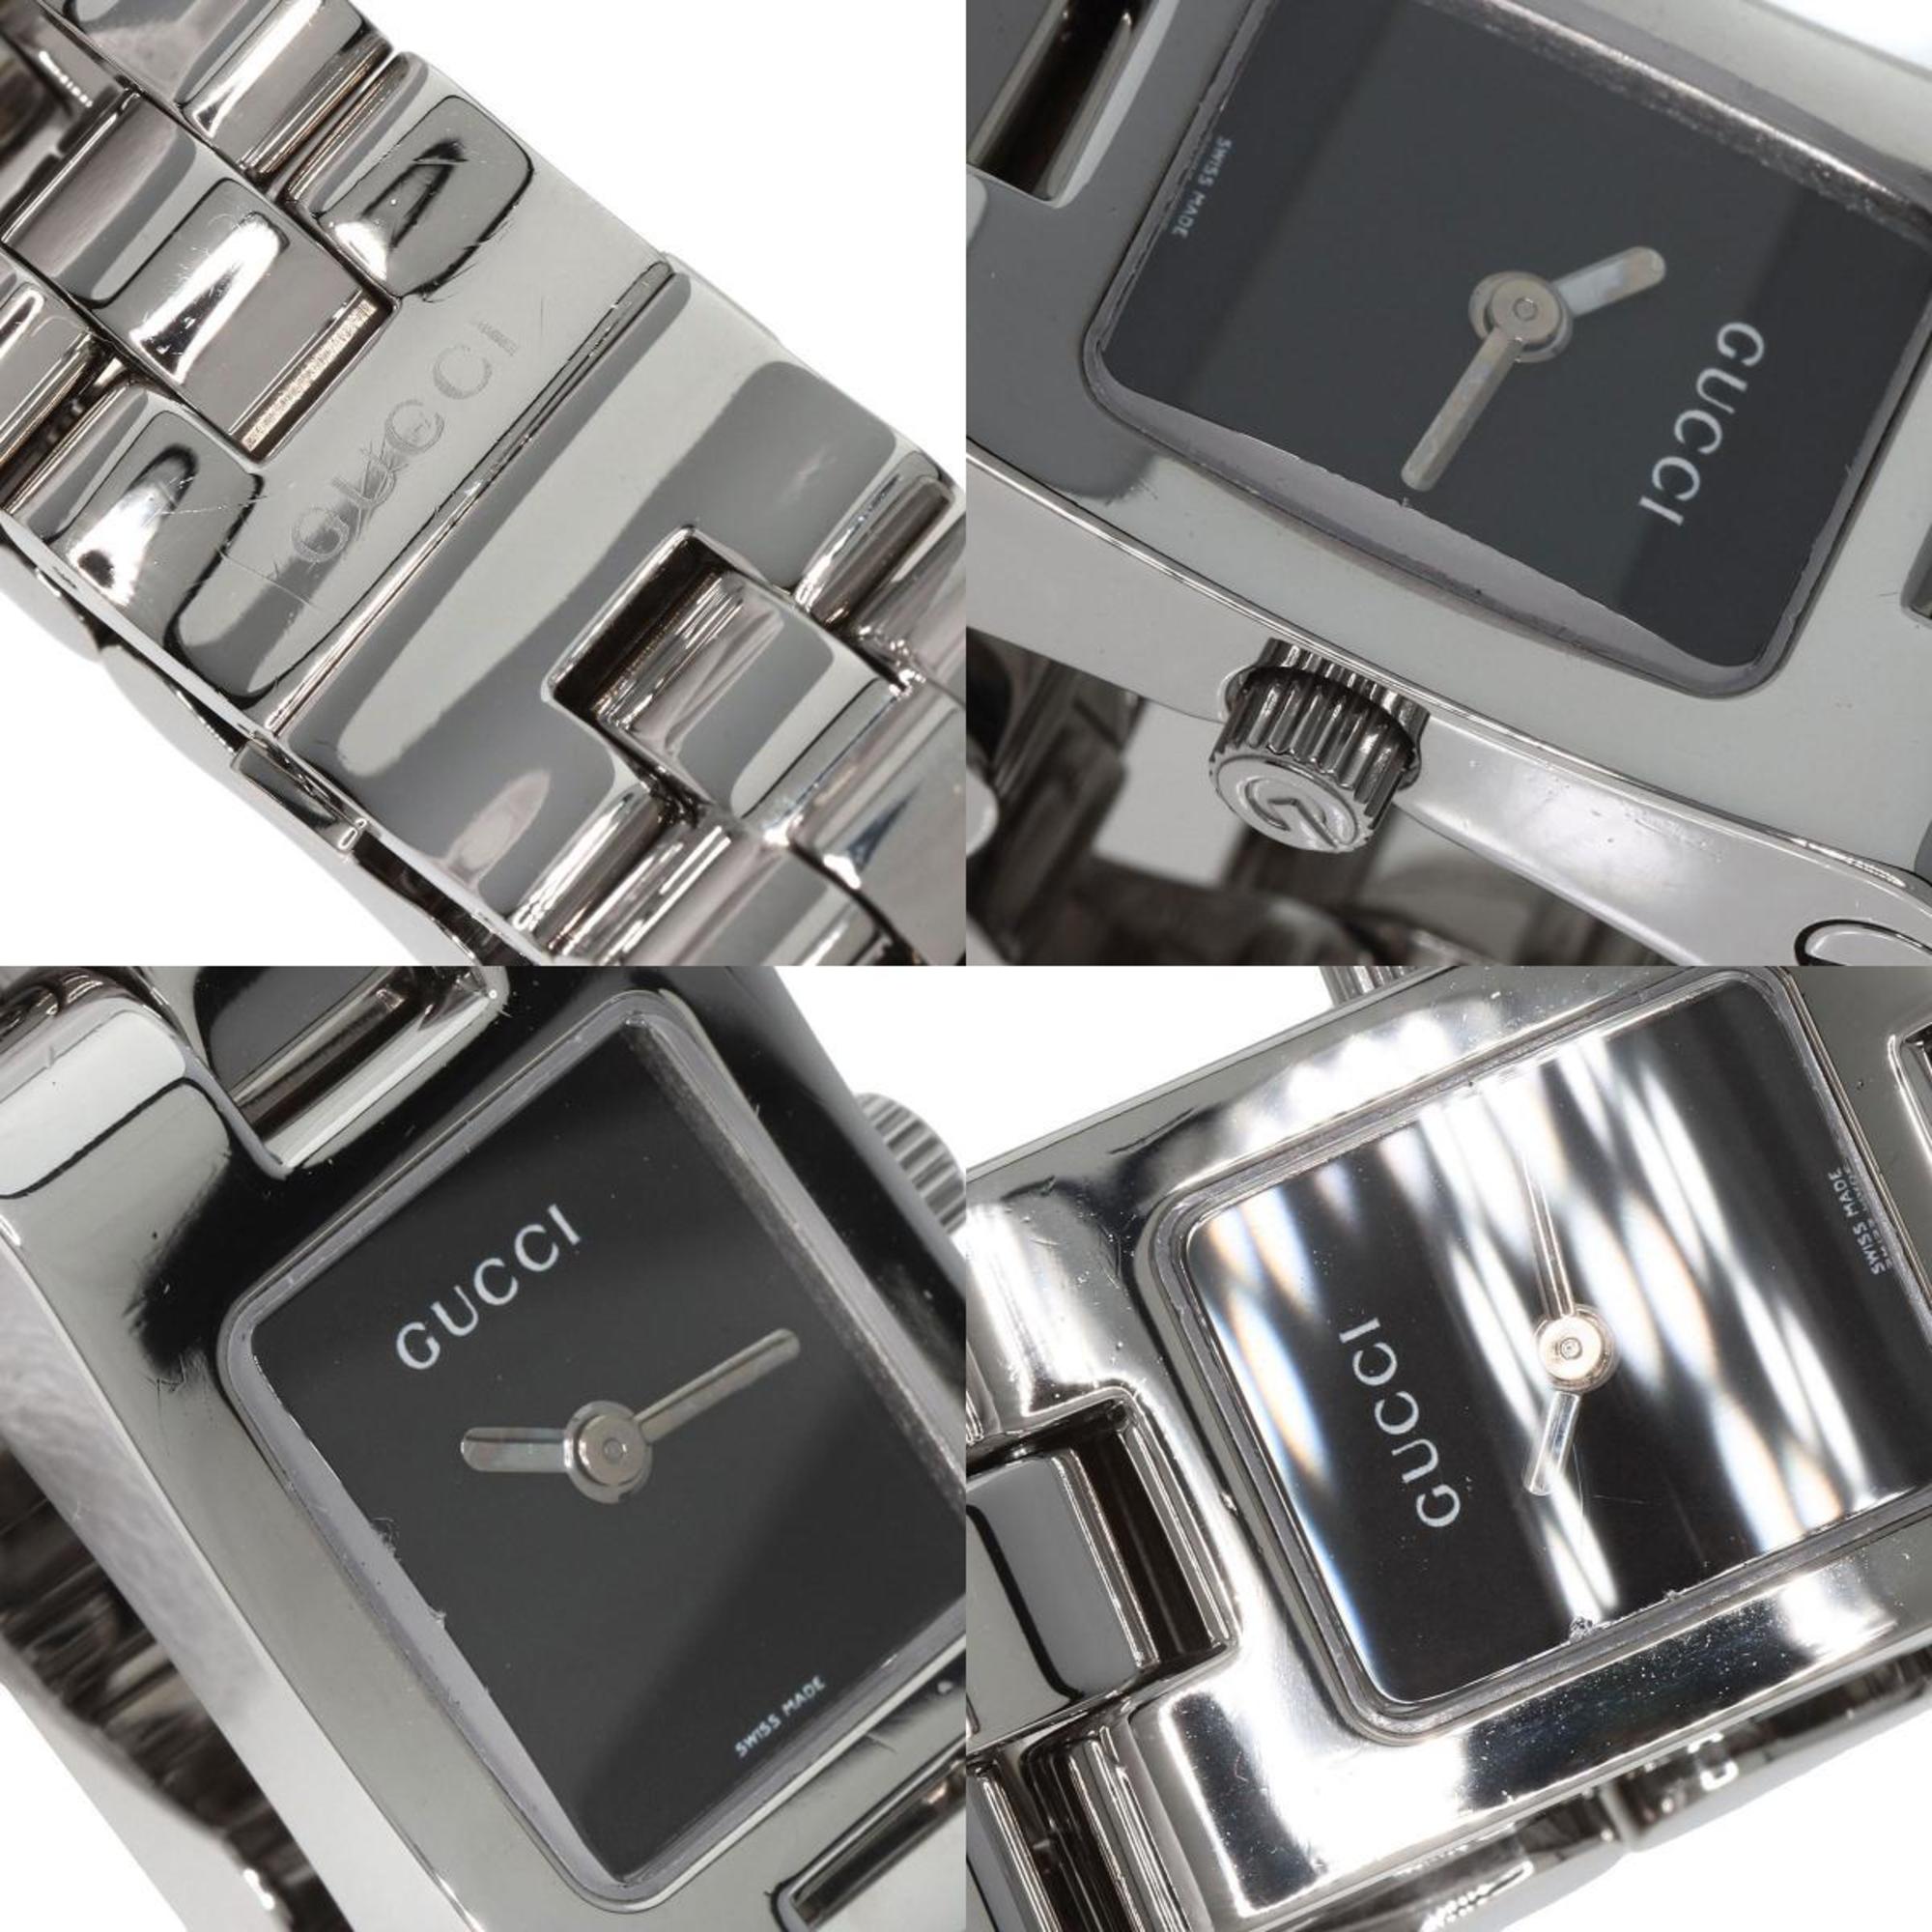 Gucci 2305L Square Face Watch Stainless Steel/SS Ladies GUCCI